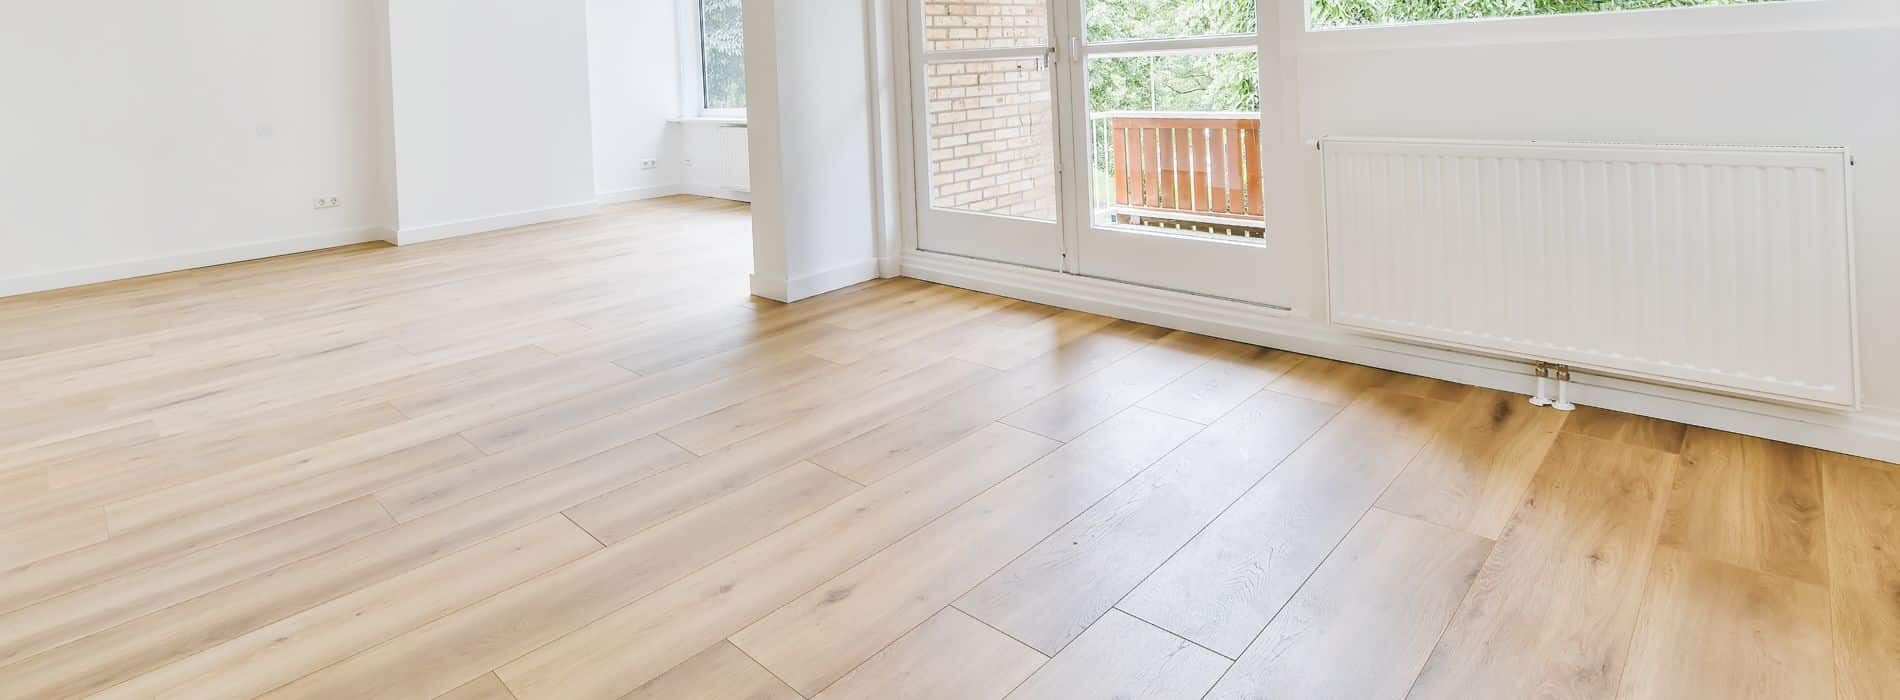 Expertly restored parquet floor in Elmbridge, KT8, with Bona 2.5K Frost whitewashing, Traffic HD matte lacquer. Durable, stunning finish for long-lasting beauty.